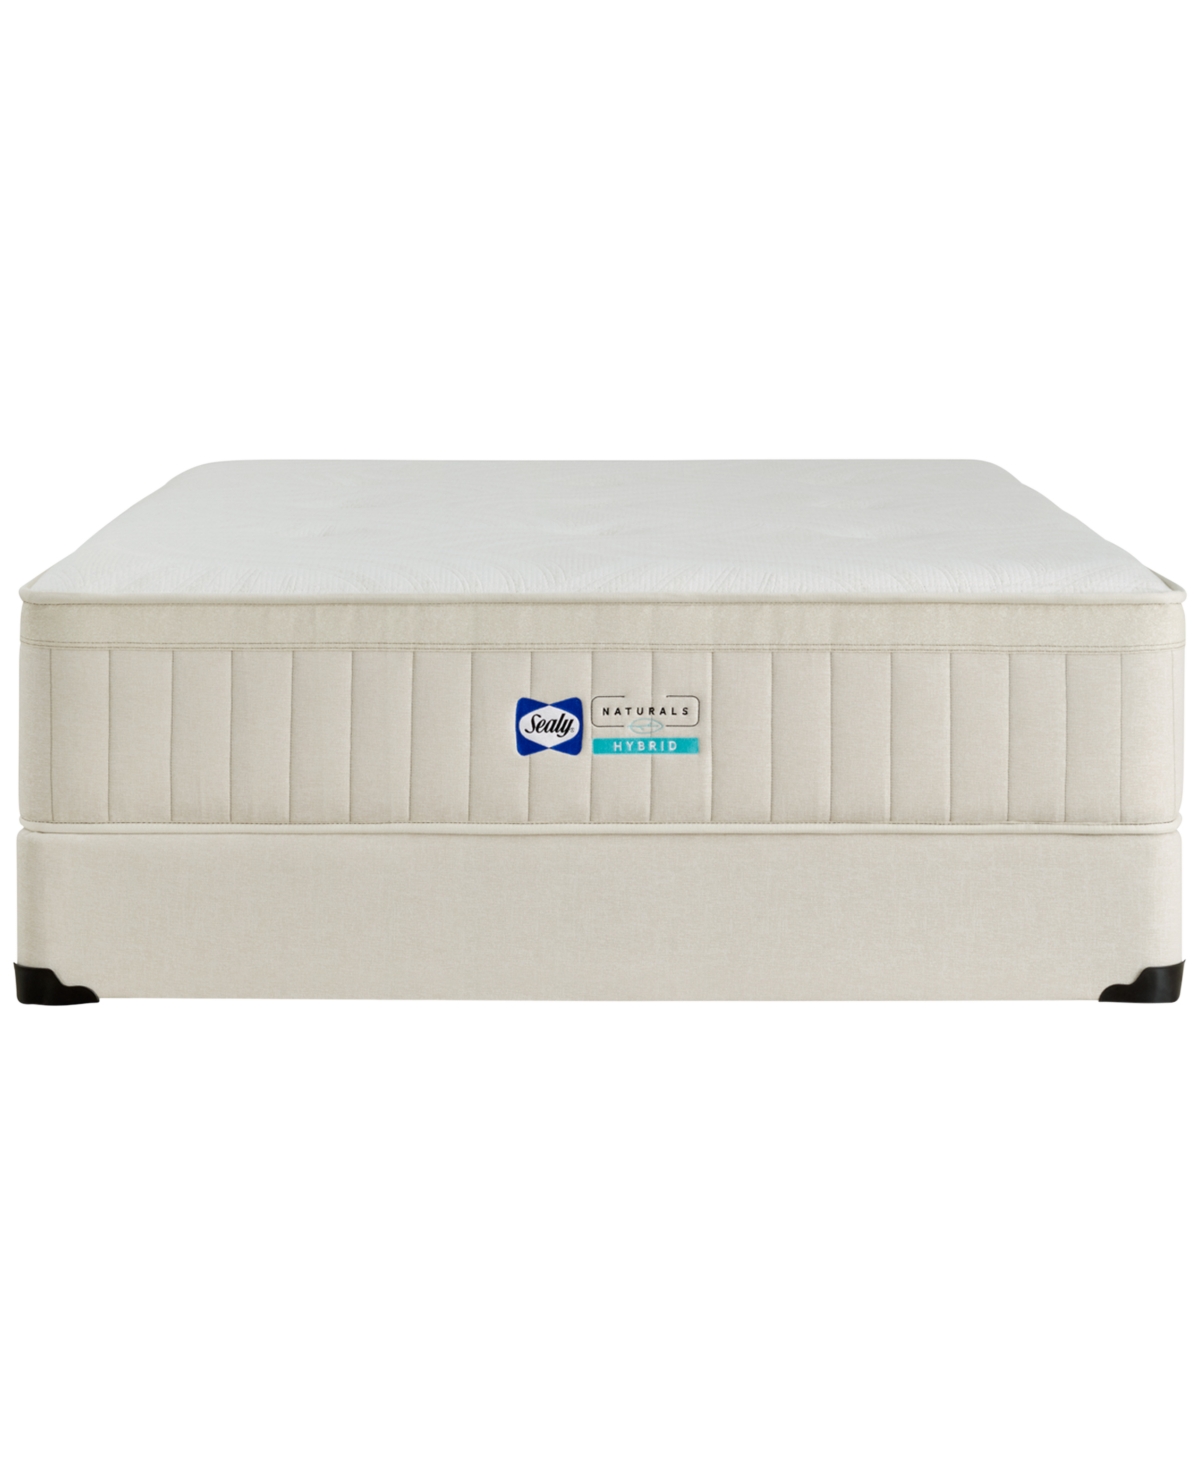 Shop Sealy Naturals Hybrid Soft Tight Top 13" Mattress, Full In White